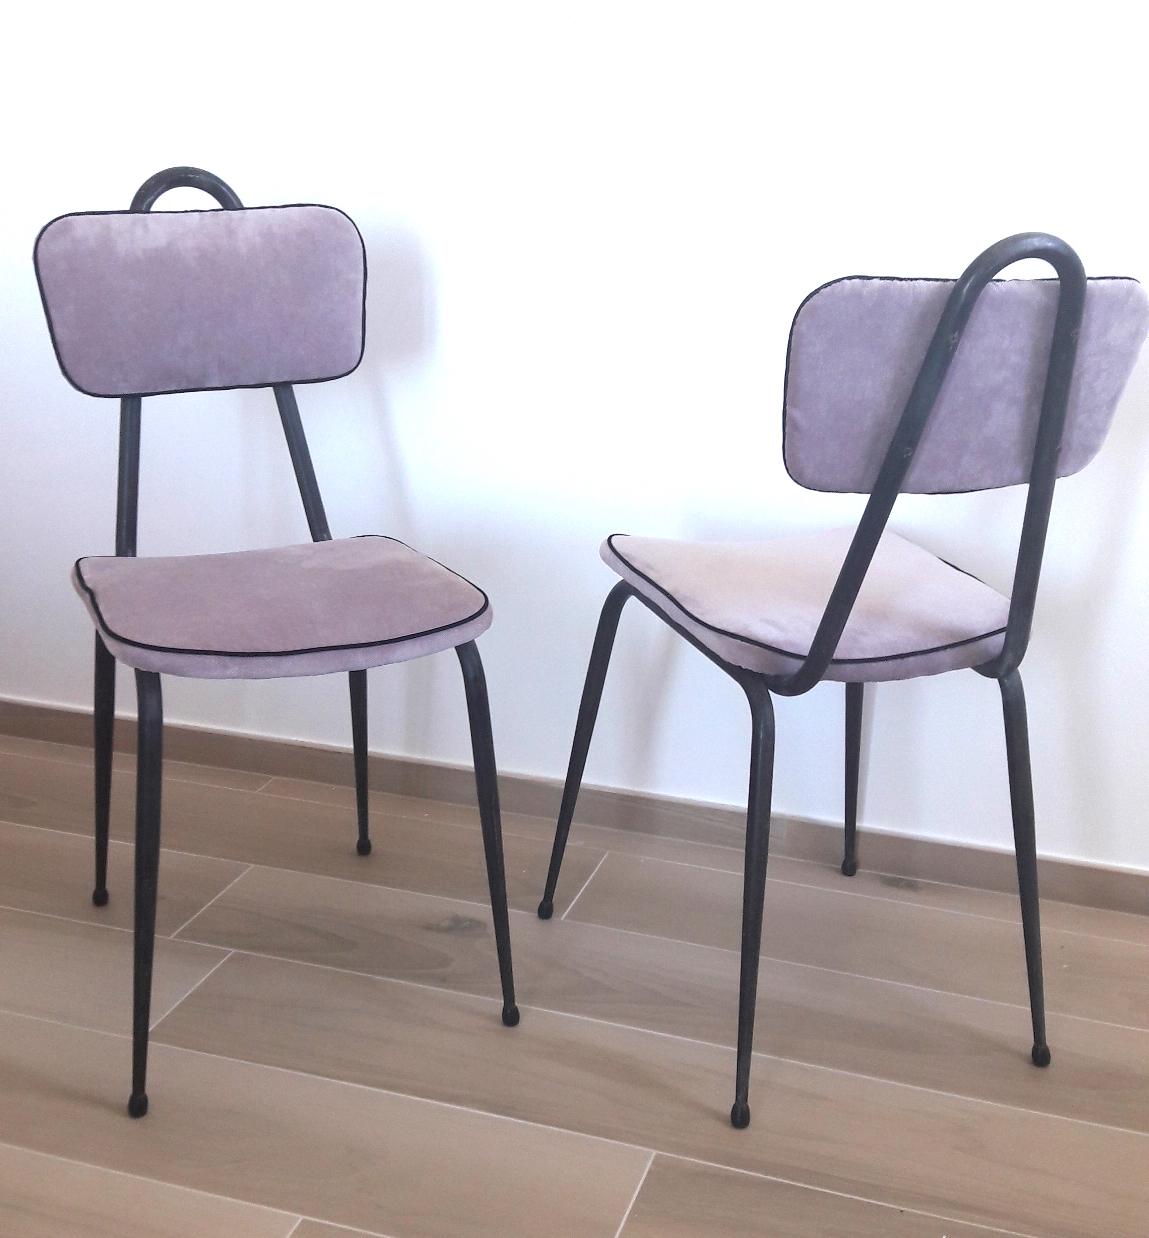 Mid-Century Modern Pair of Dark Metal and Lilac Velvet Chairs, 1950s In Good Condition For Sale In Cassina de'Pecchi, IT